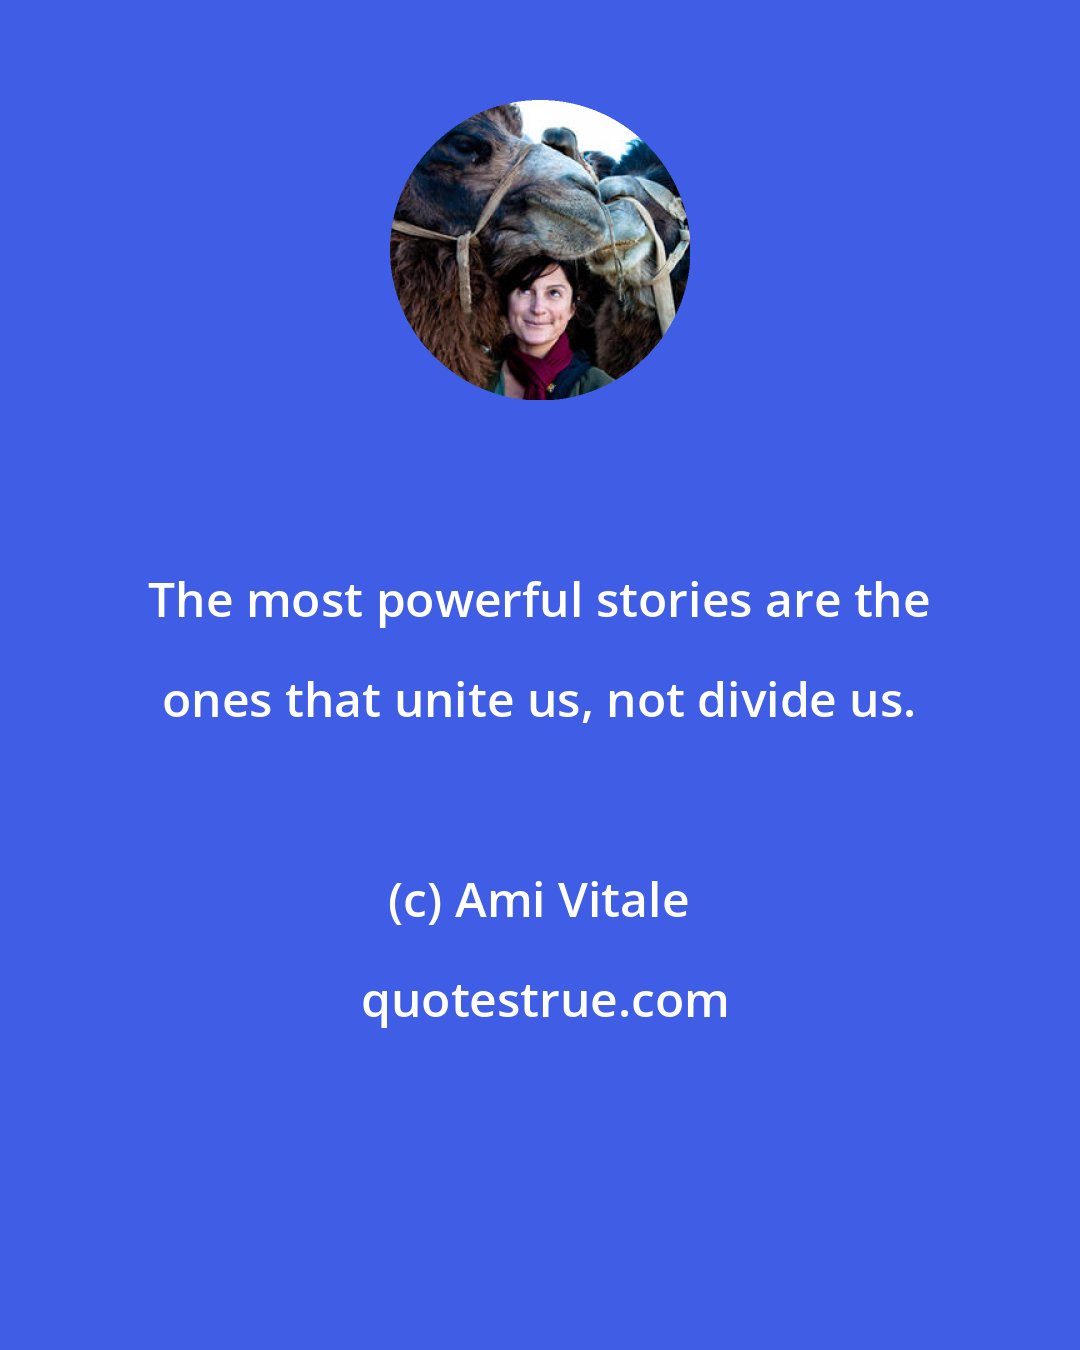 Ami Vitale: The most powerful stories are the ones that unite us, not divide us.